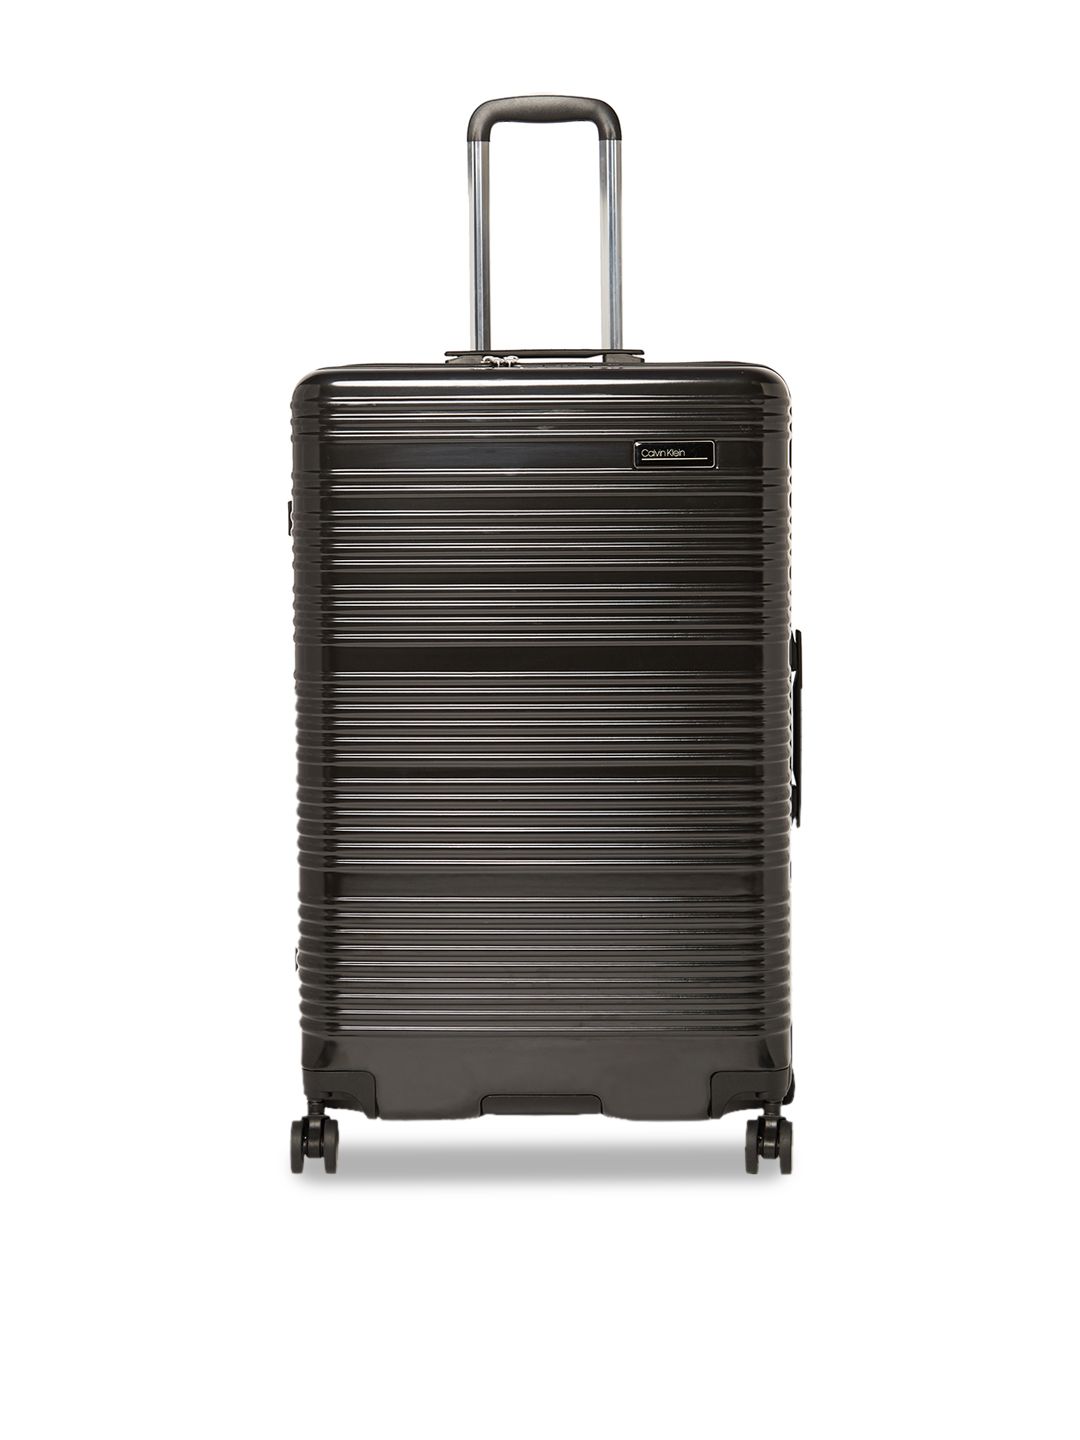 Calvin Klein Black Textured Globetrotter Hard-Sided Large Trolley Suitcase Price in India